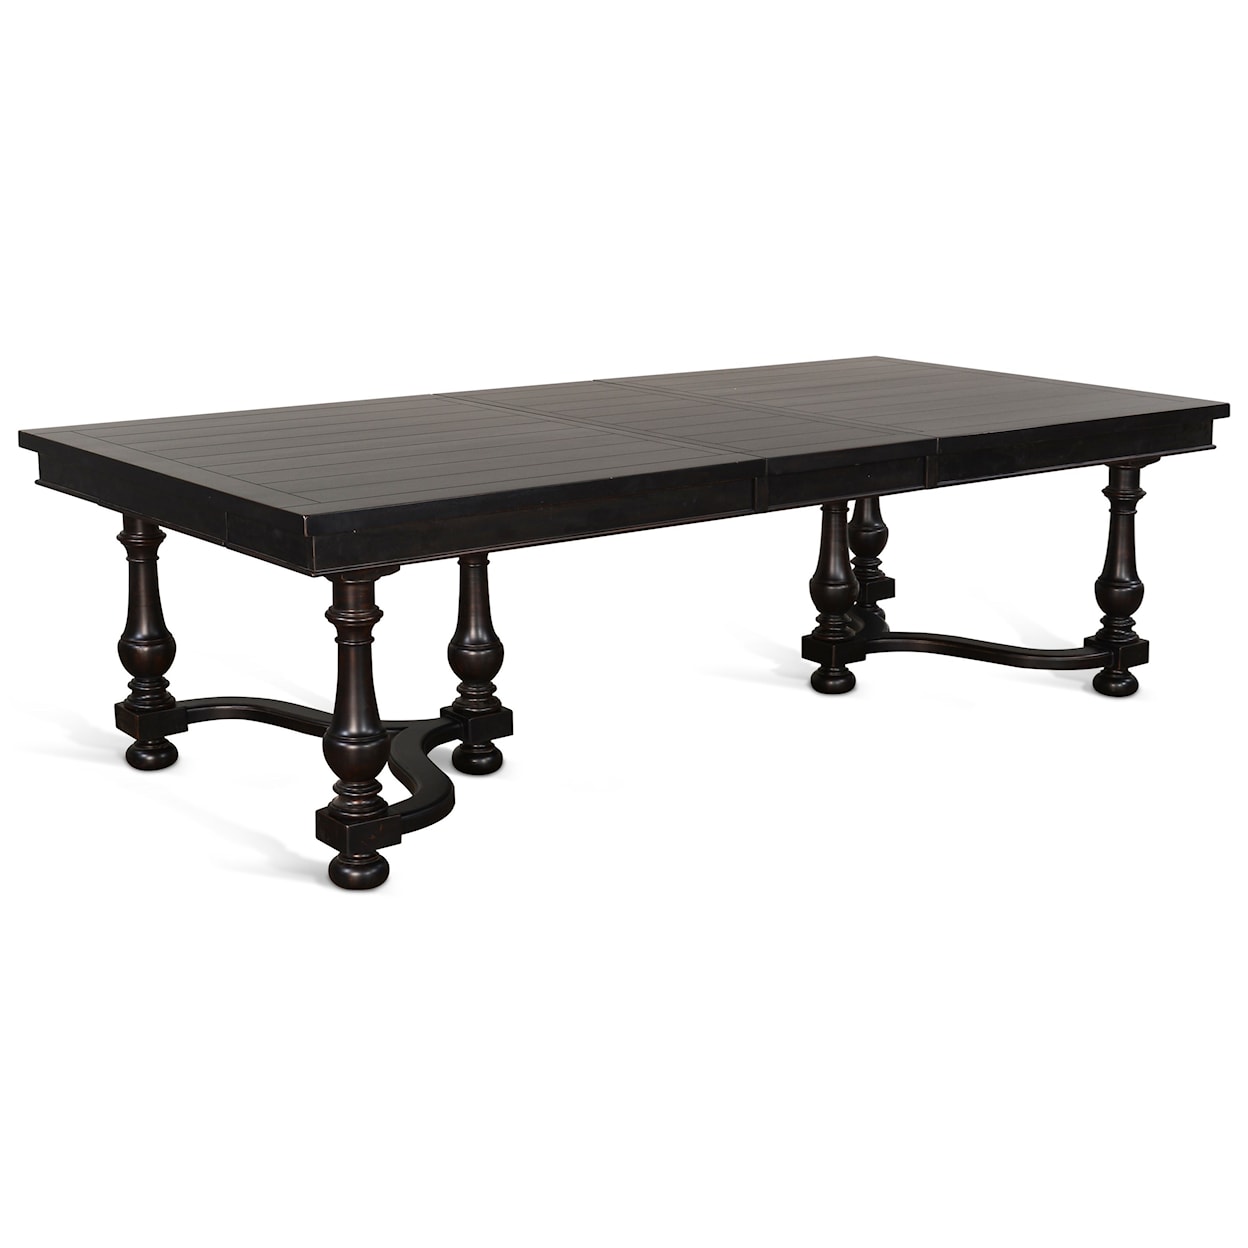 Sunny Designs Scottsdale BW Dining Table